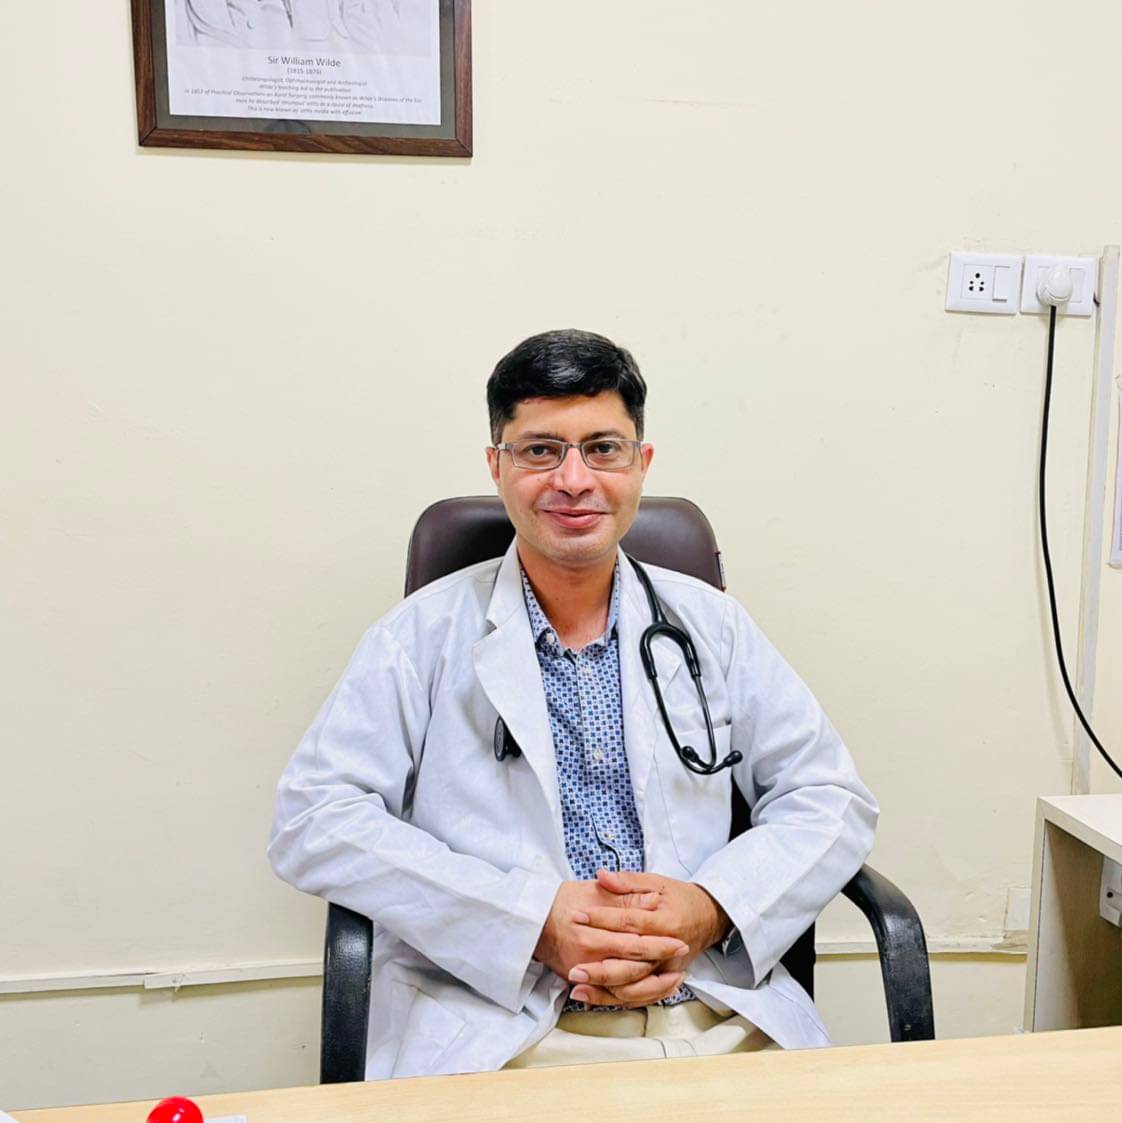 Stapes Surgery, Ent Clinic in Delhi